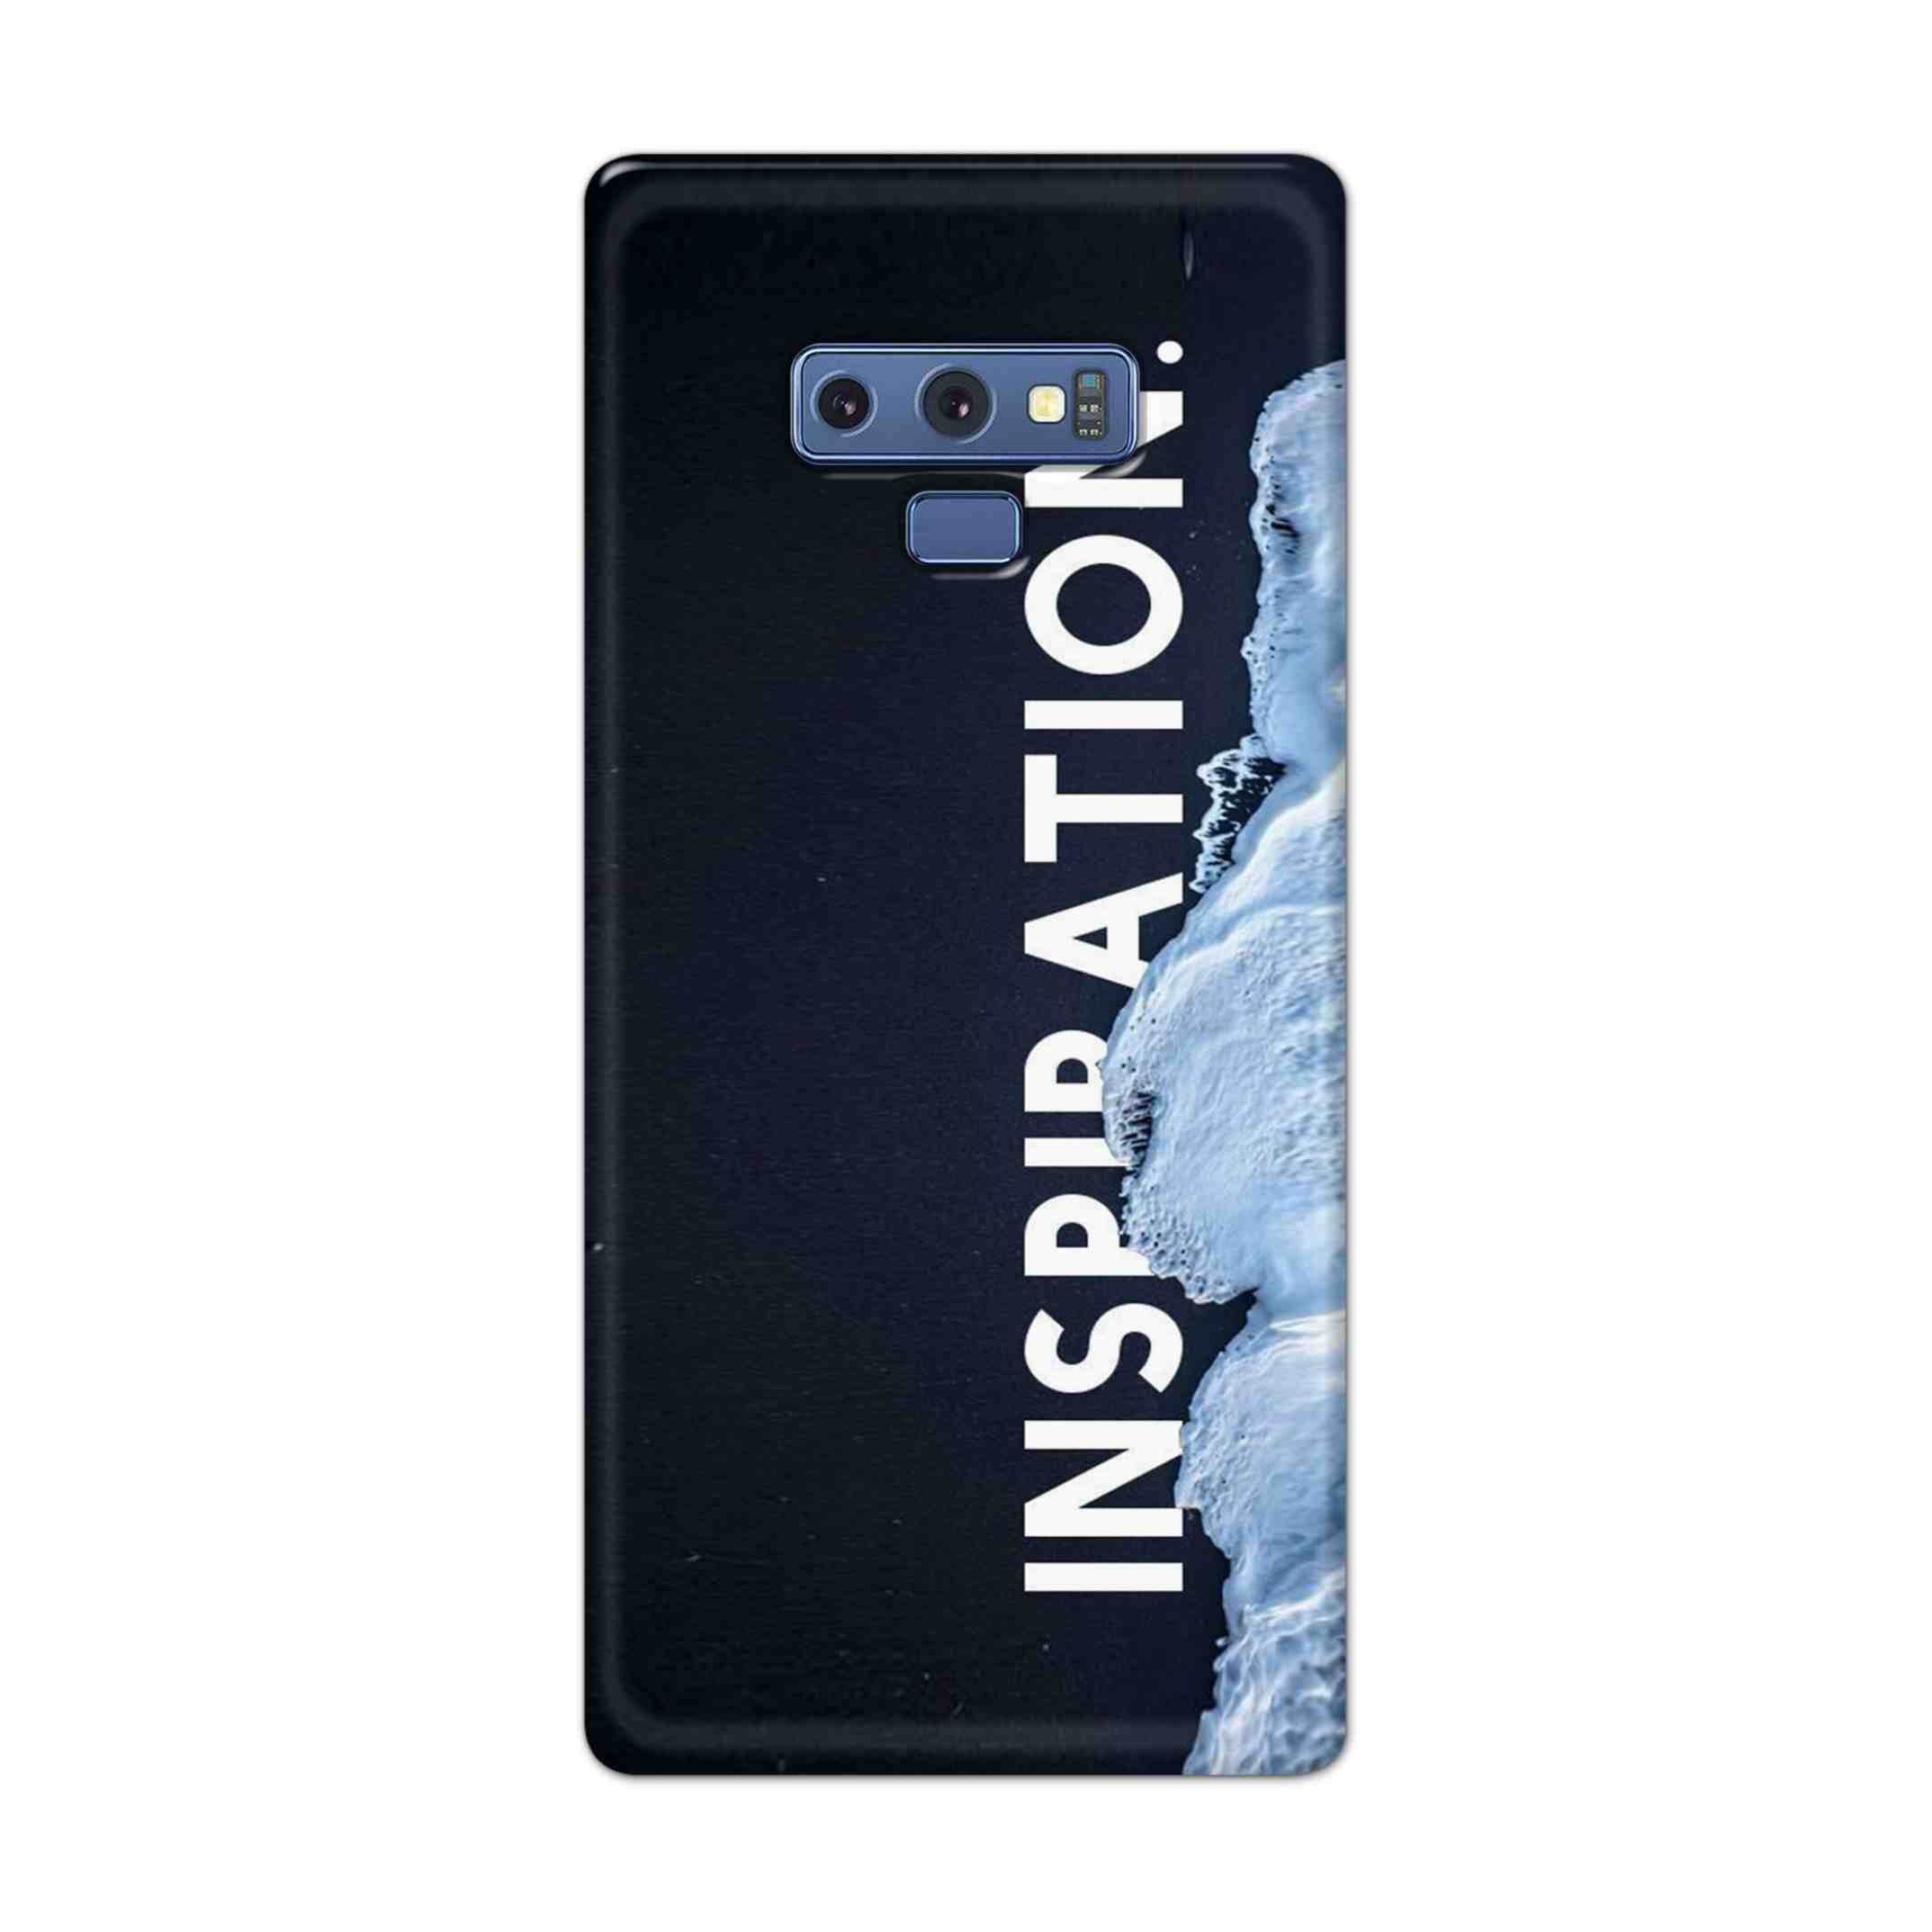 Buy Inspiration Hard Back Mobile Phone Case Cover For Samsung Galaxy Note 9 Online